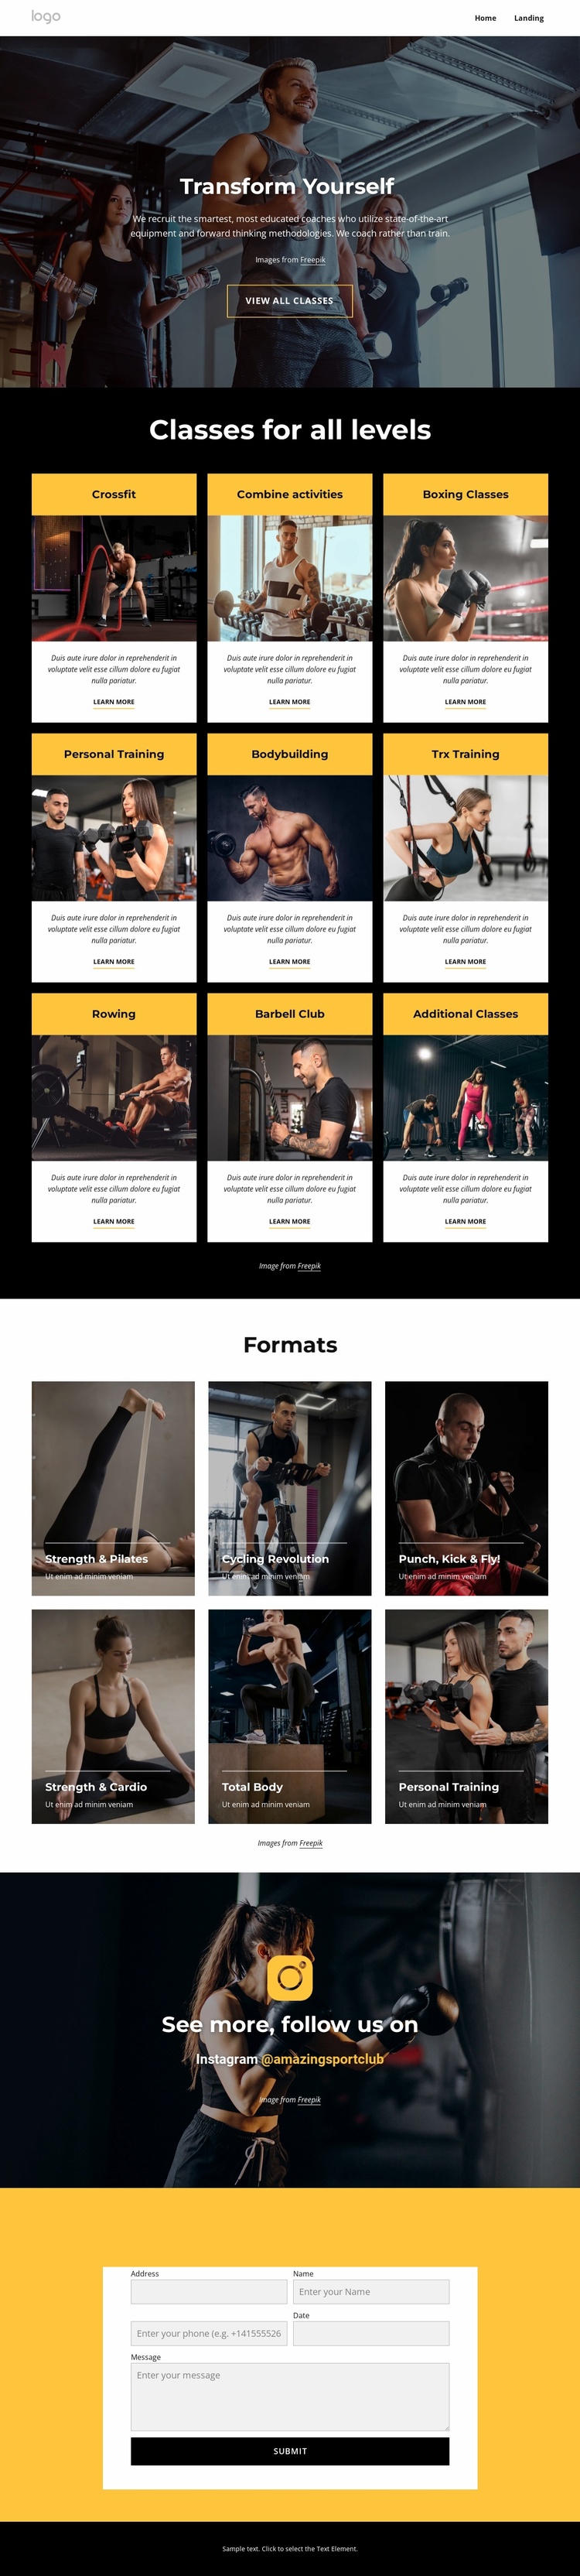 Fitness classes, indoor pools Landing Page